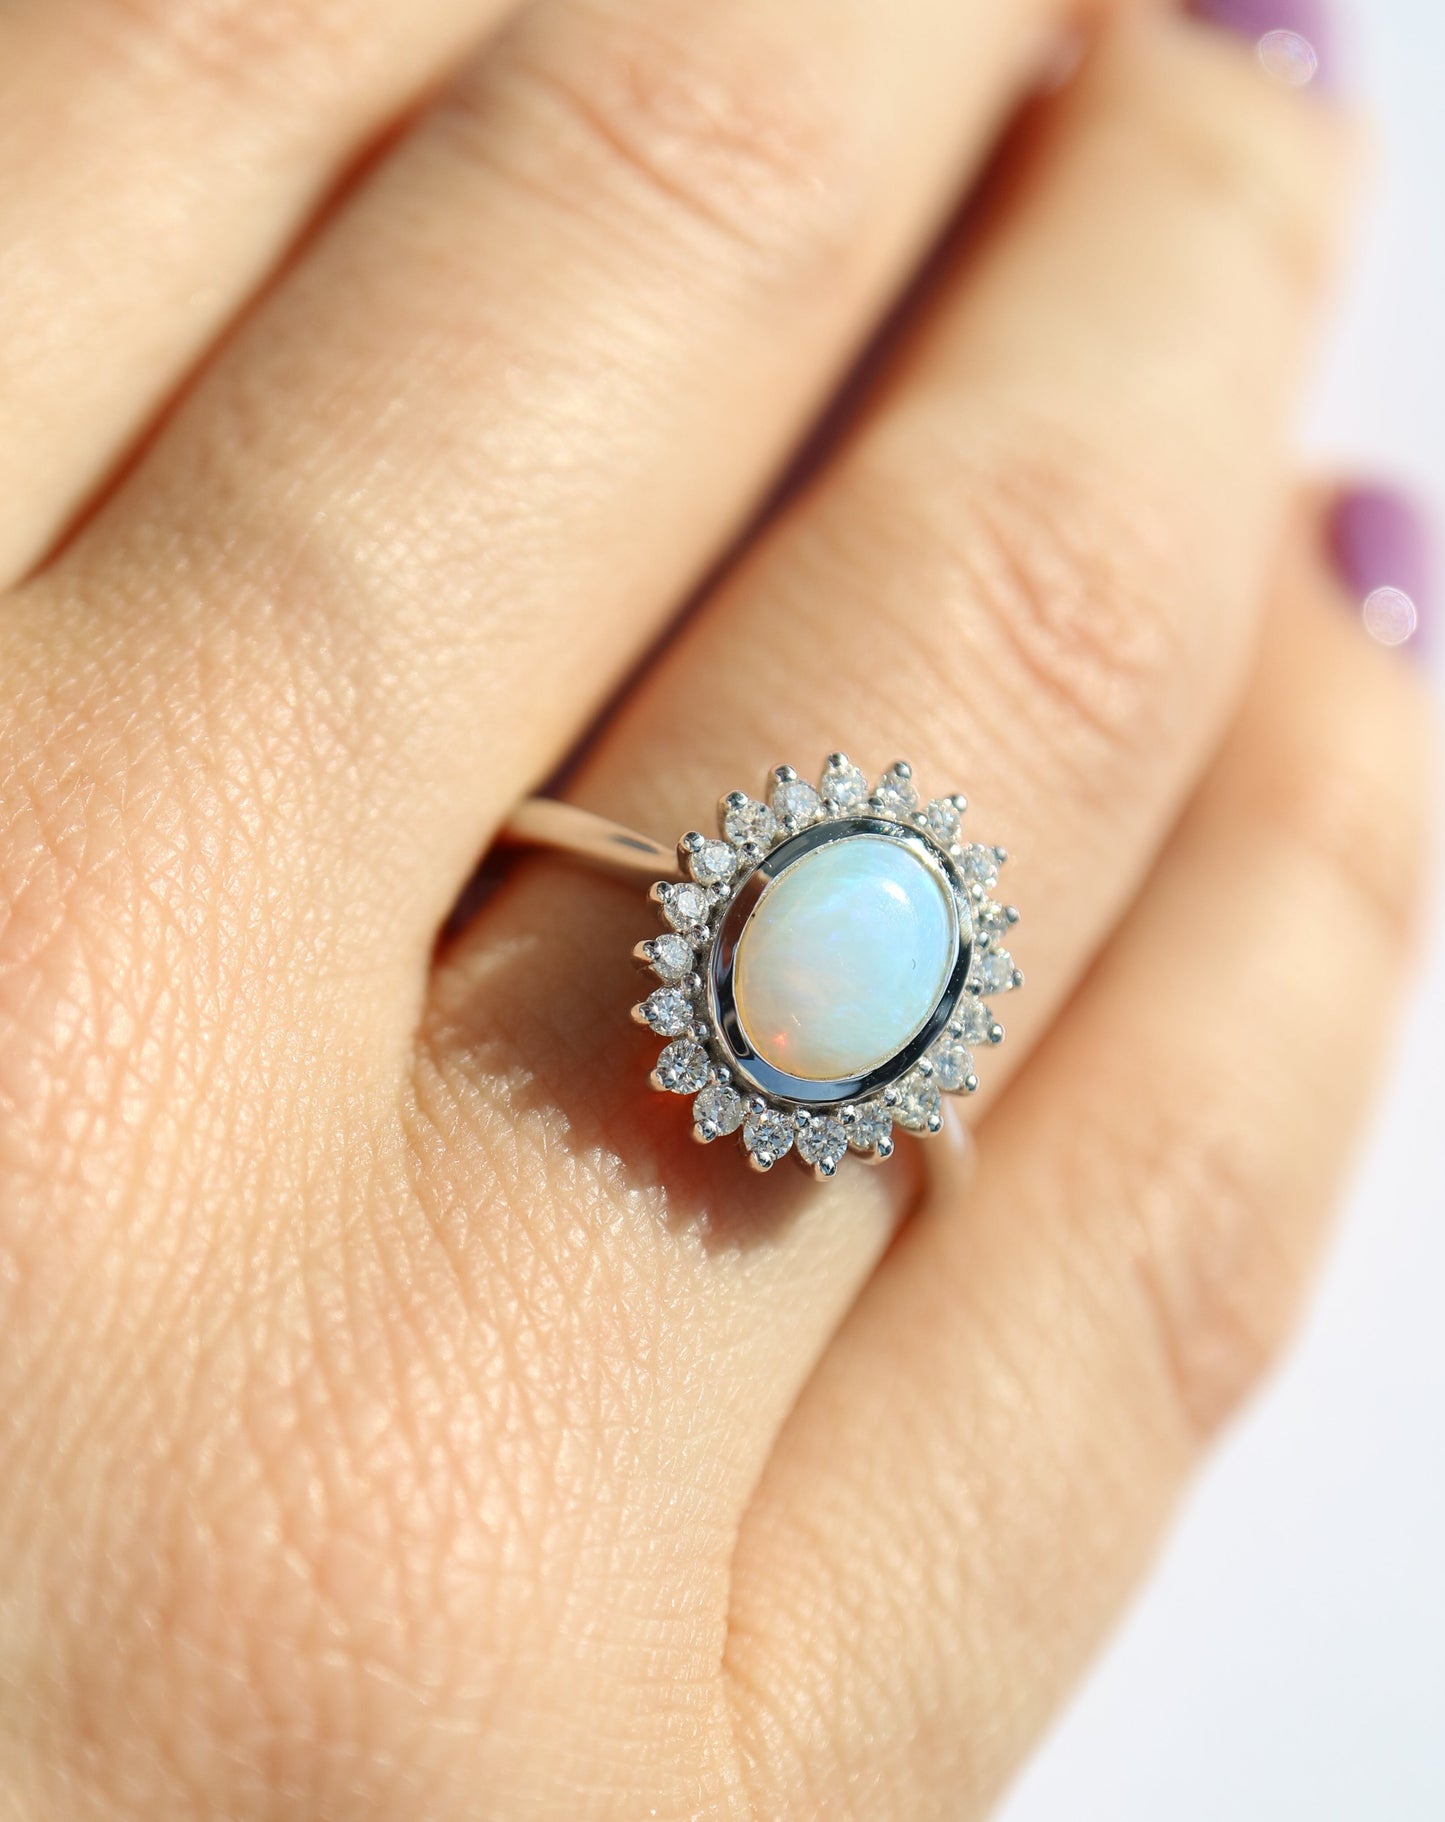 9ct white gold, opal and diamond halo statement ring